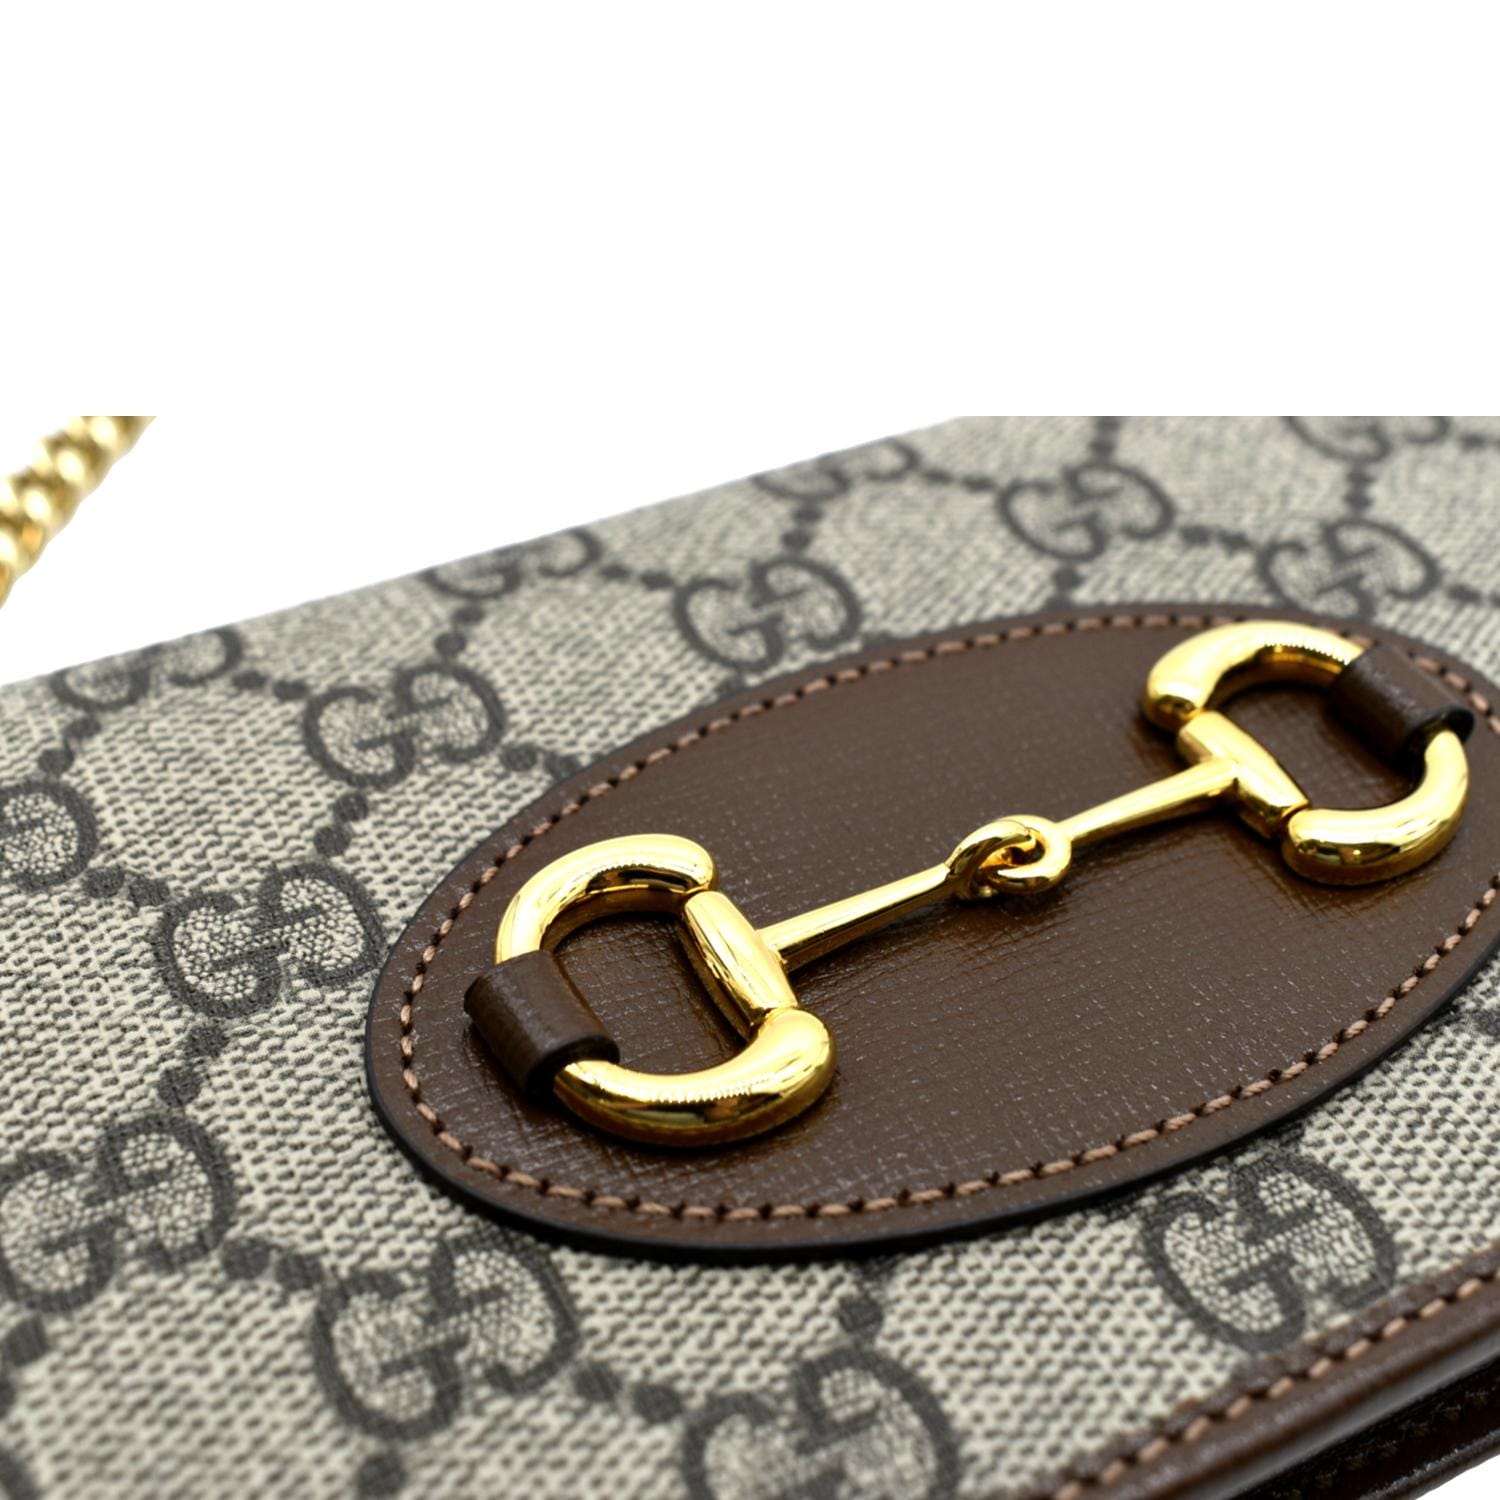 Gucci Horsebit 1955 wallet with chain